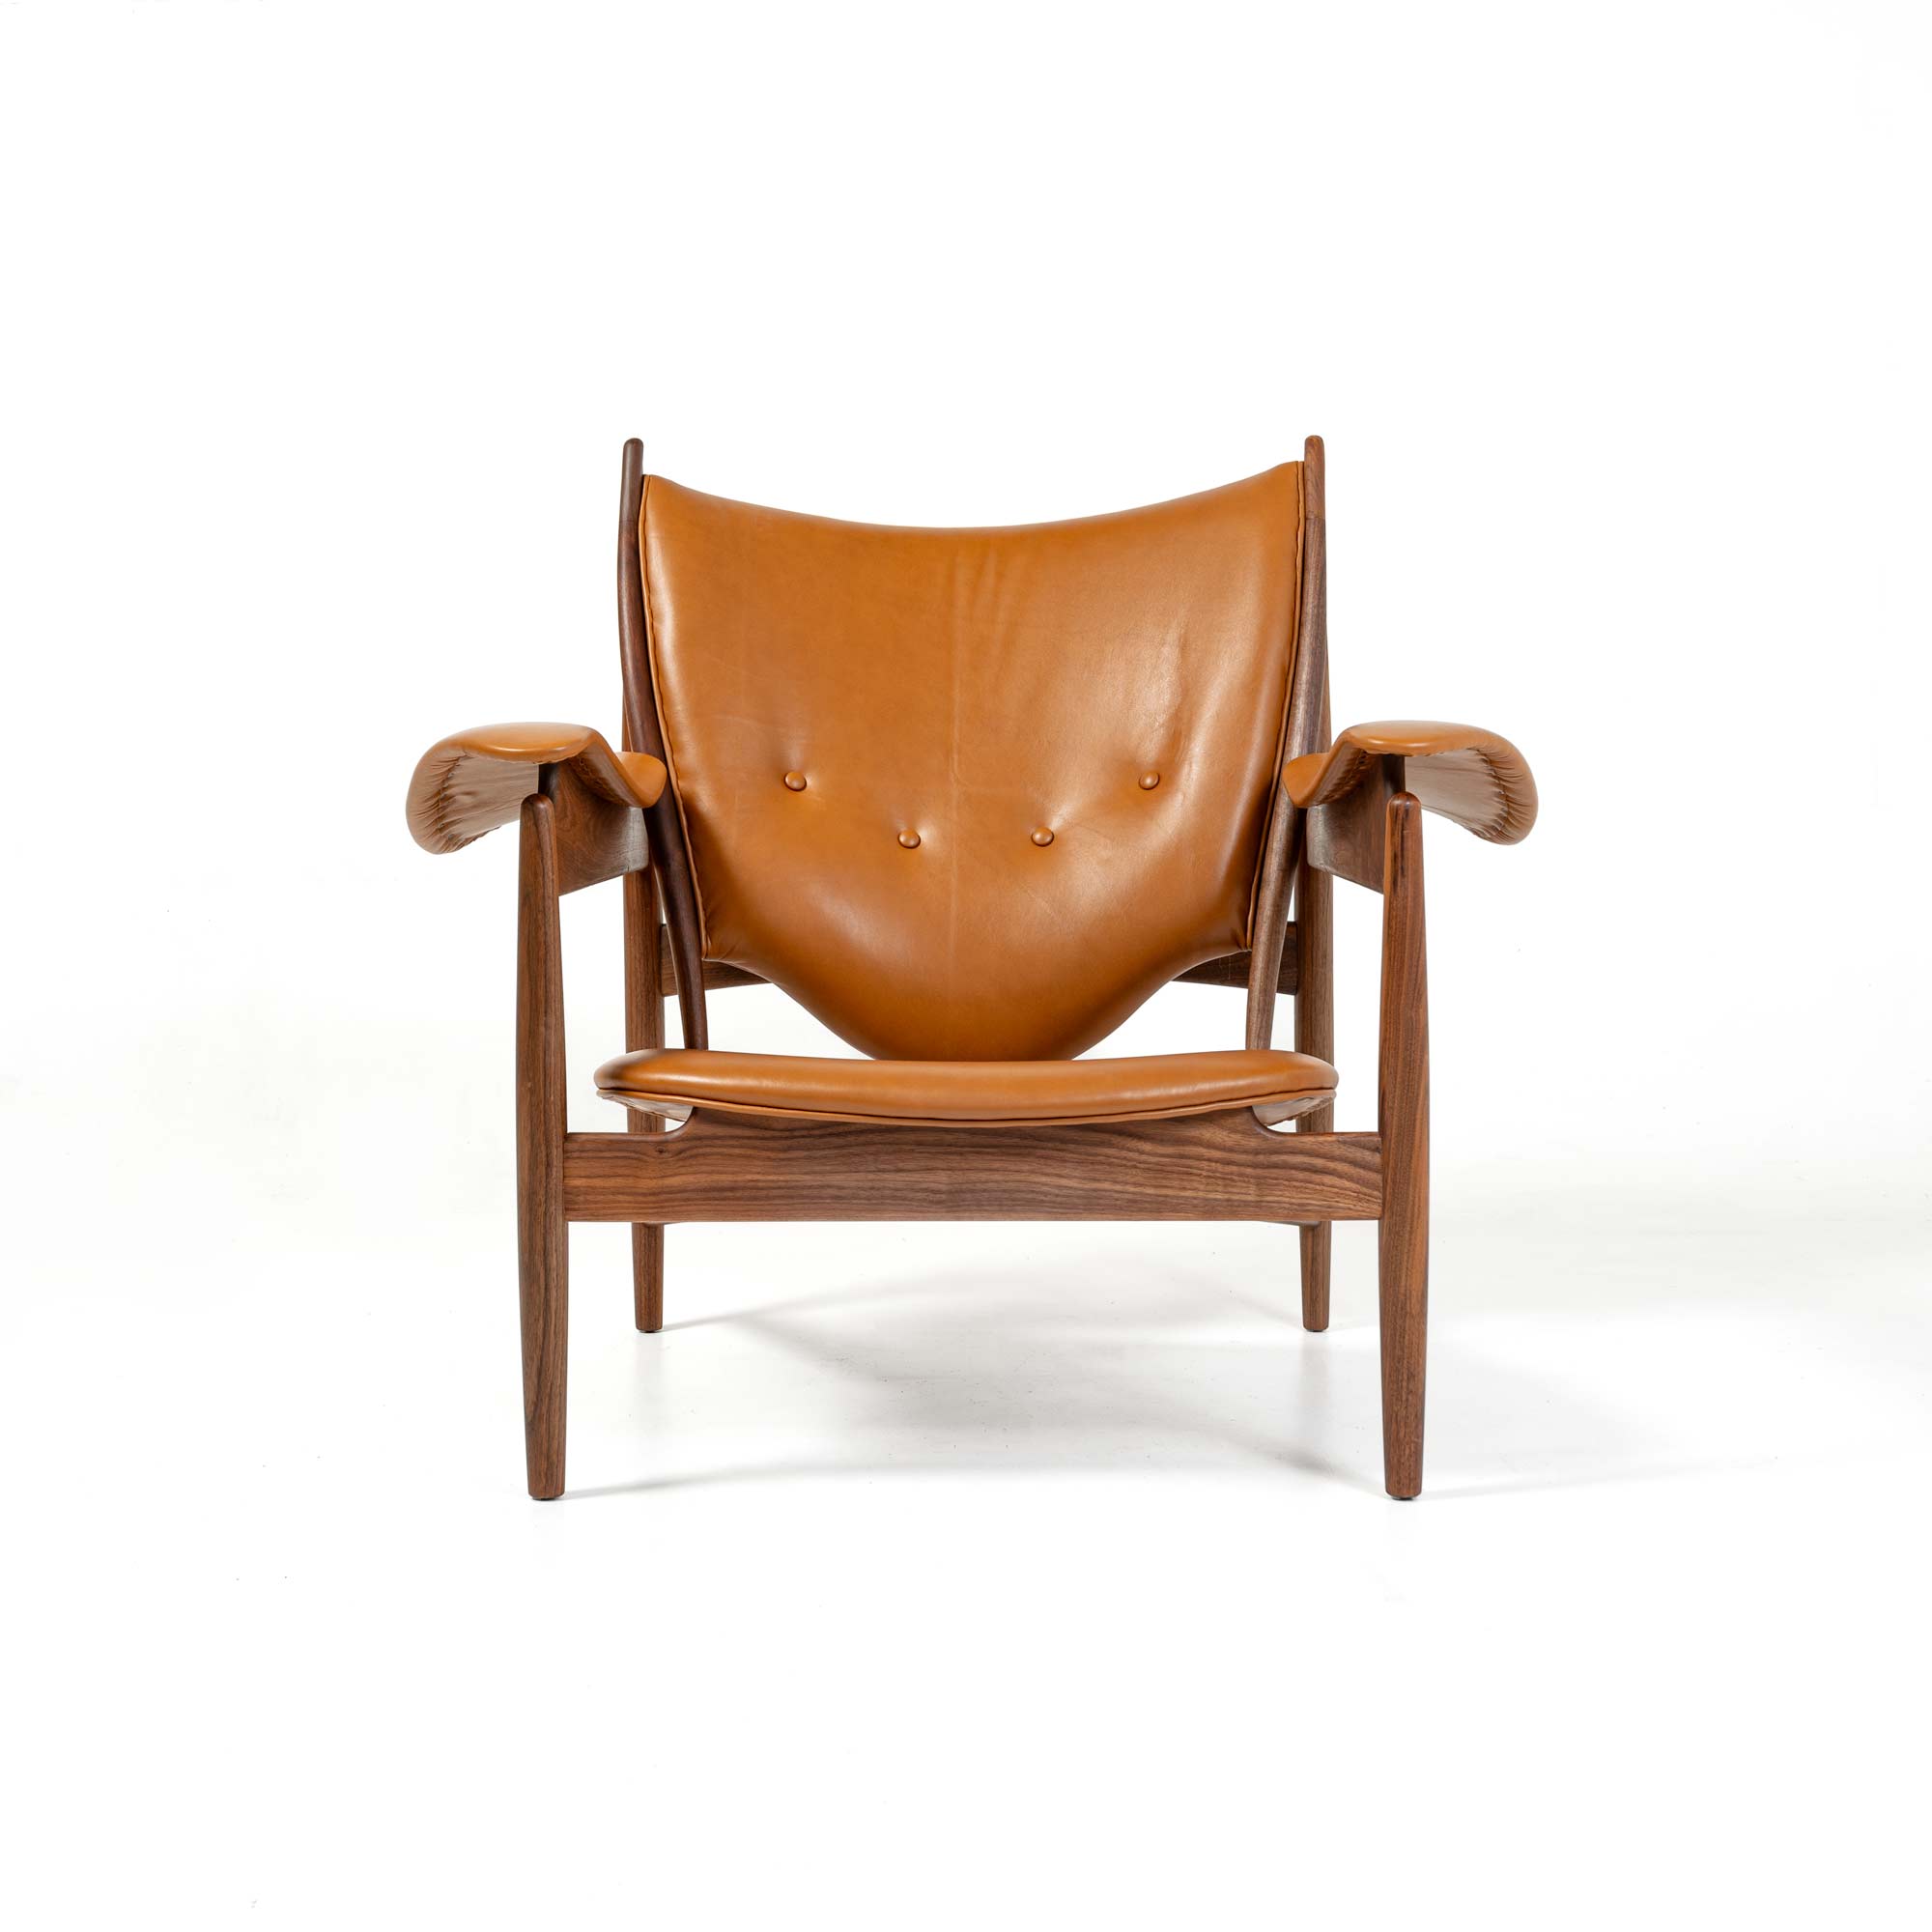 Chieftain Chair by Finn Juhl for Baker Furniture 1998 edition